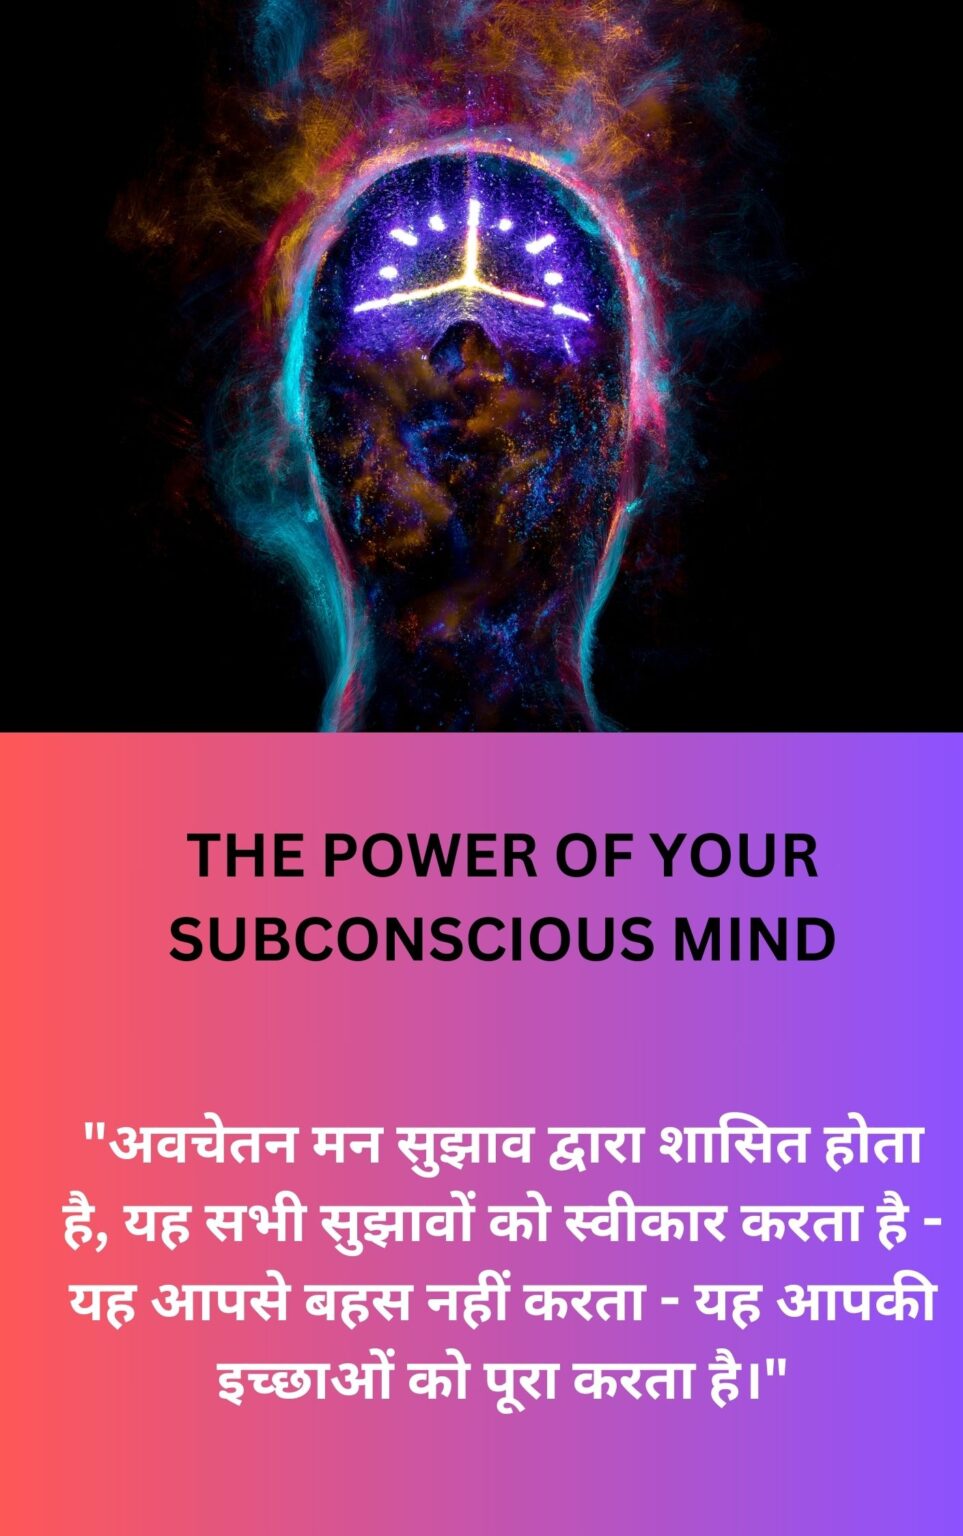 IMAGE INDICATE THE TITLE OF BOOK CALLED THE POWER OF SUBCONSCIOUS MIND